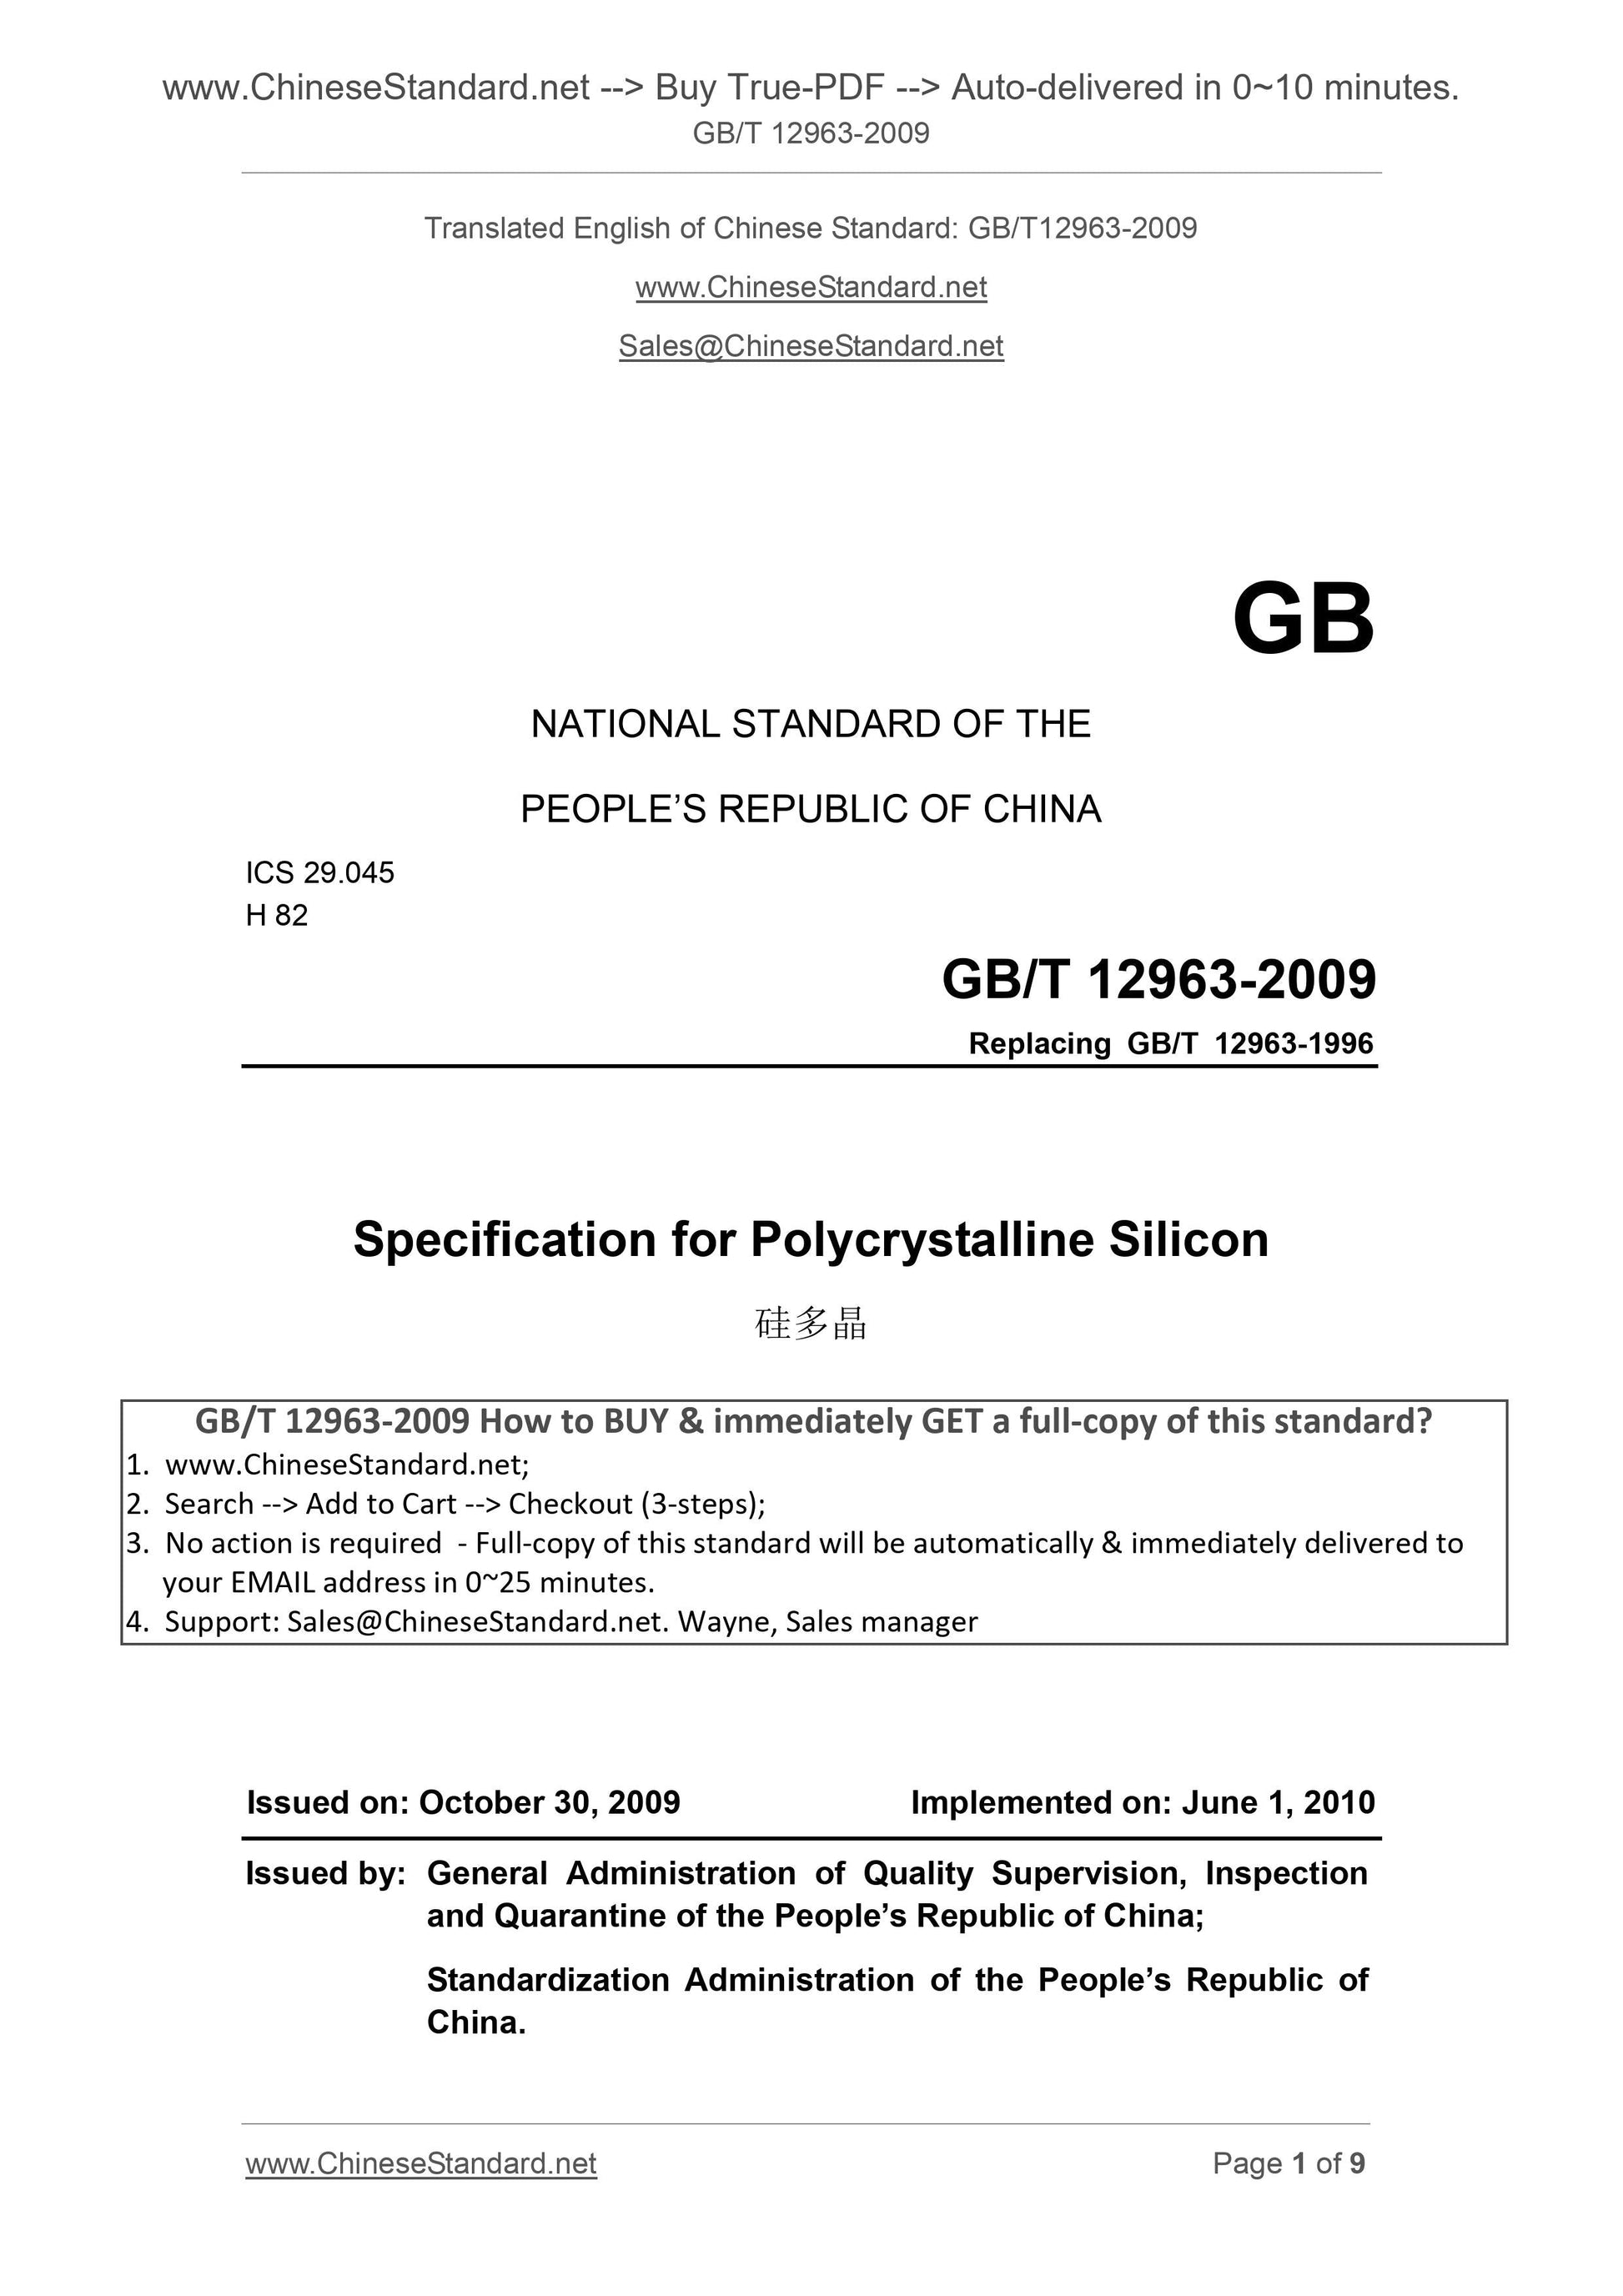 GB/T 12963-2009 Page 1